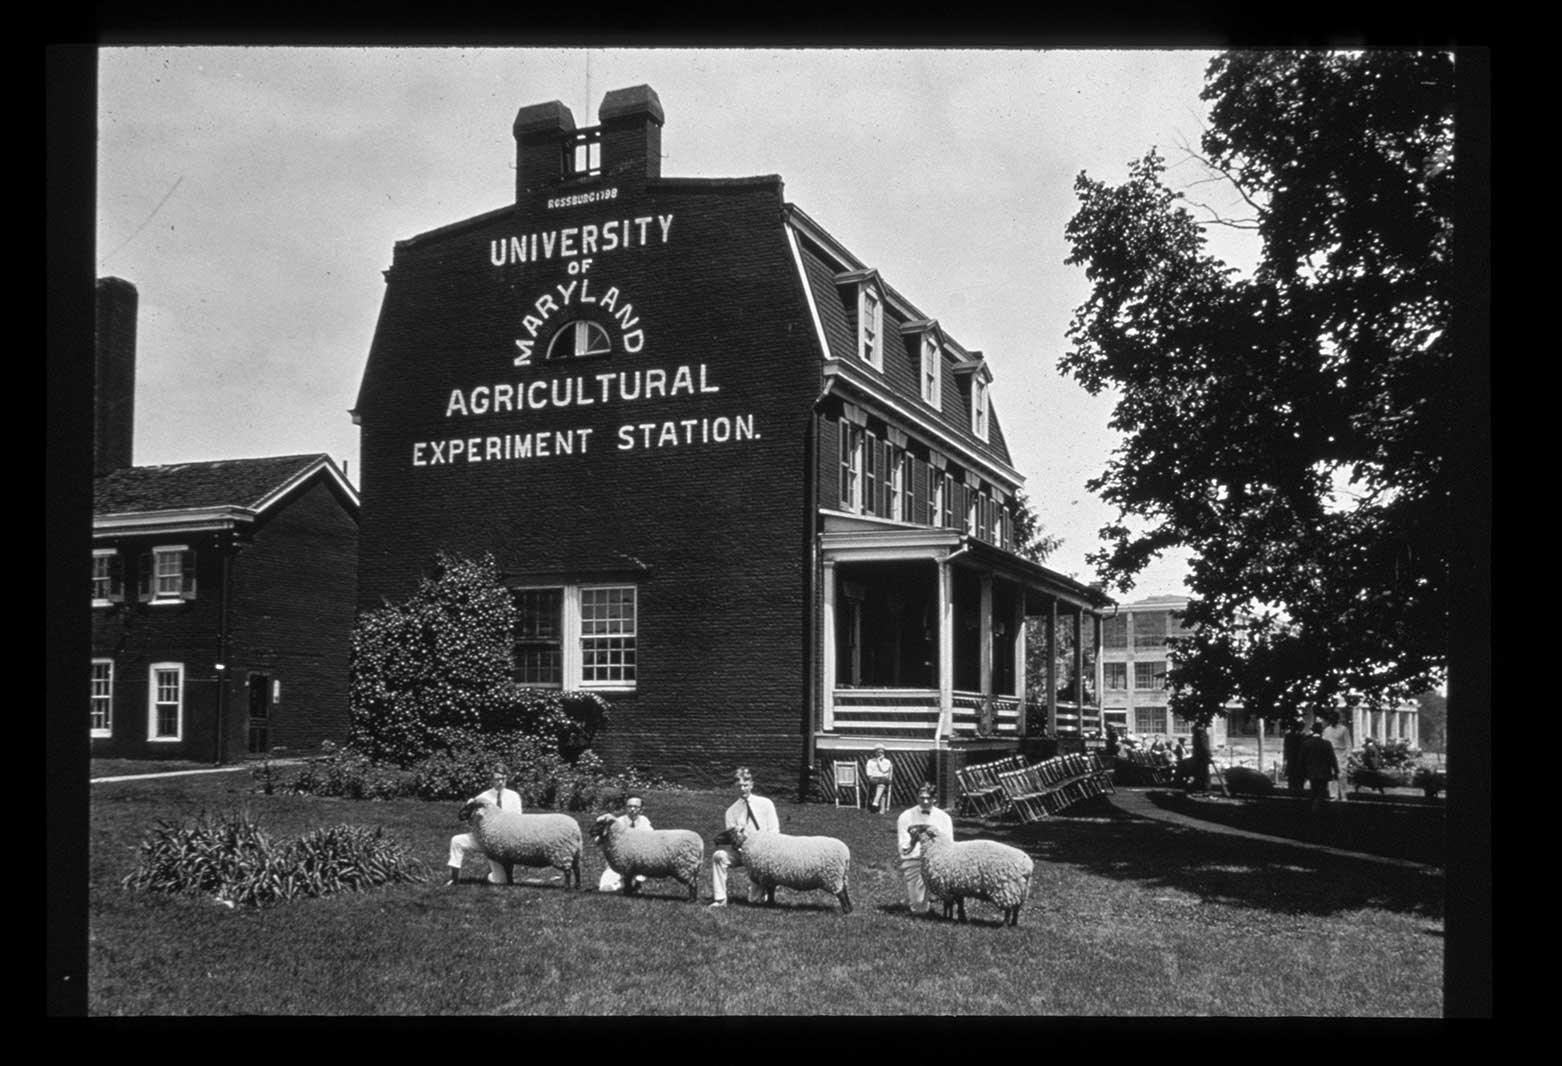 Maryland Agricultural College archival photo of a barn and man with a sheep